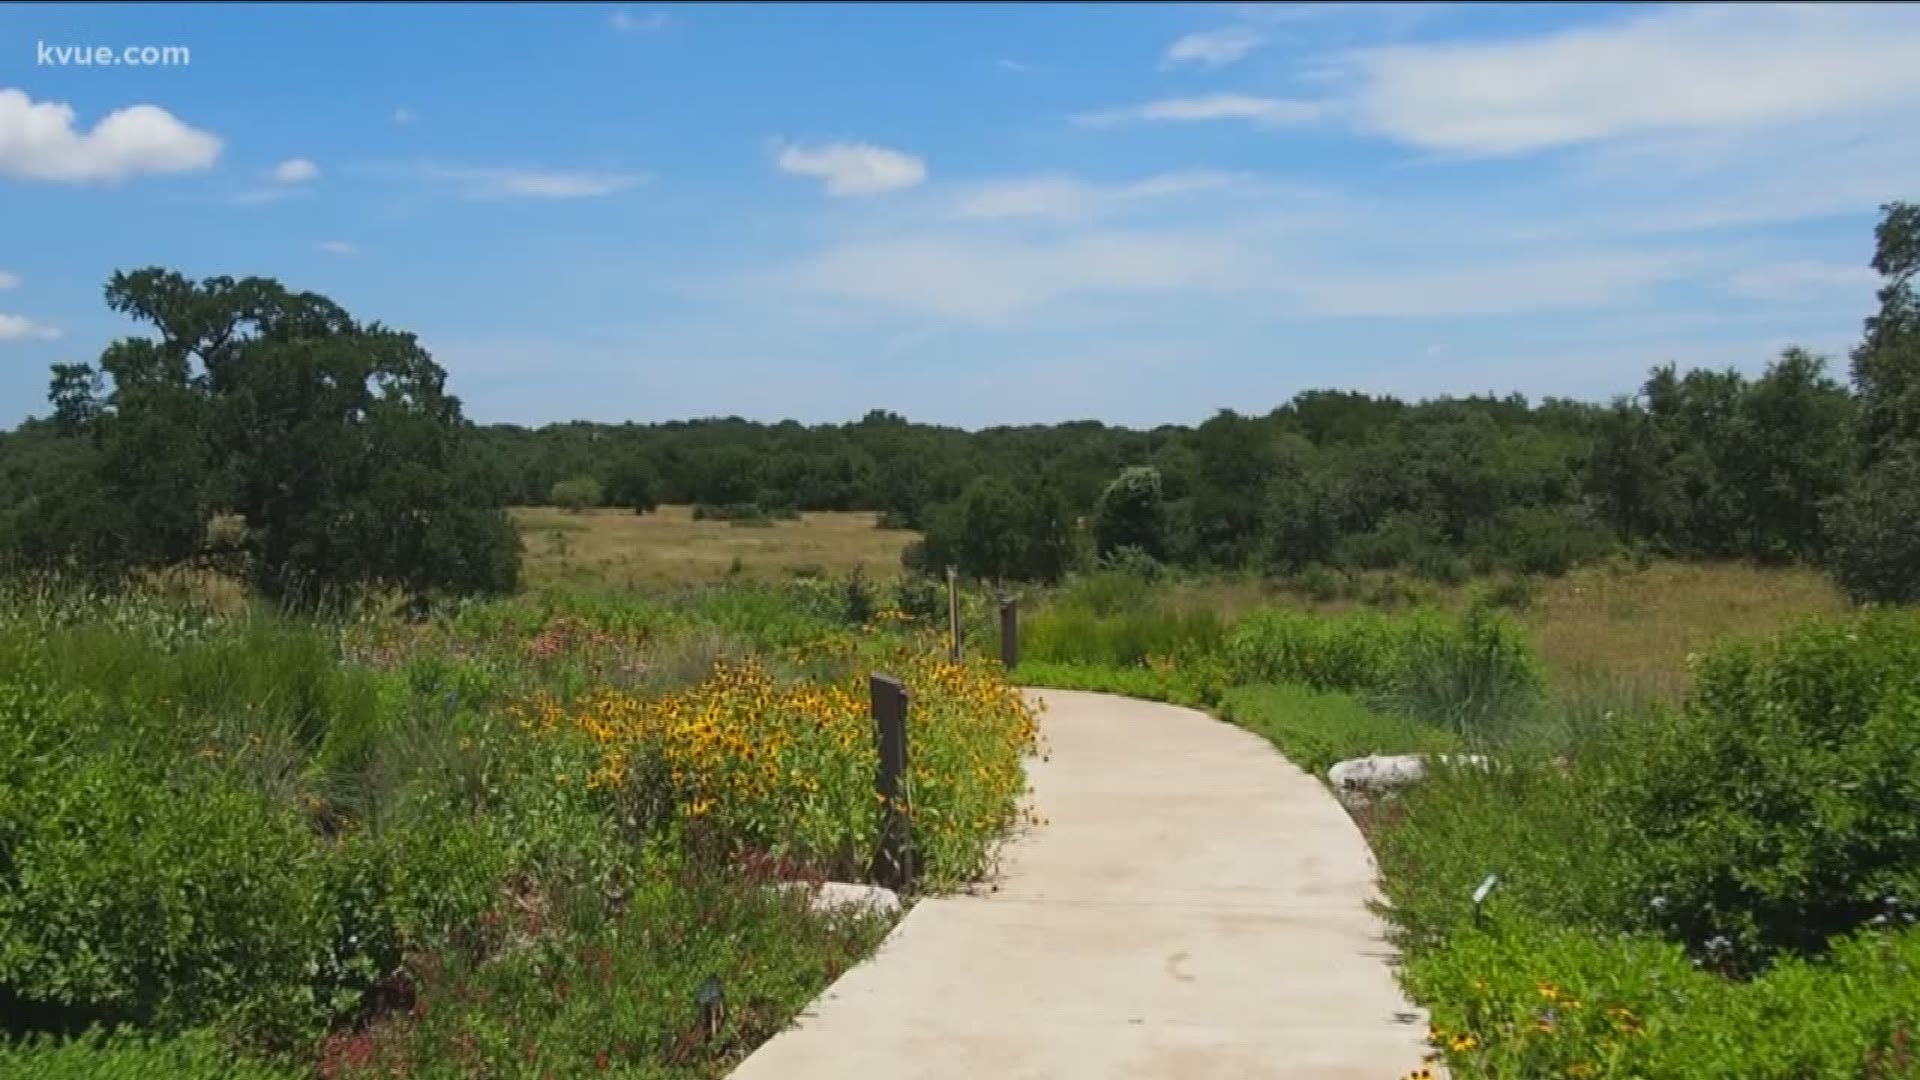 Brittany Flowers stopped by the Lady Bird Johnson Wildflower Center to find out what "Nature Nights" has to offer.